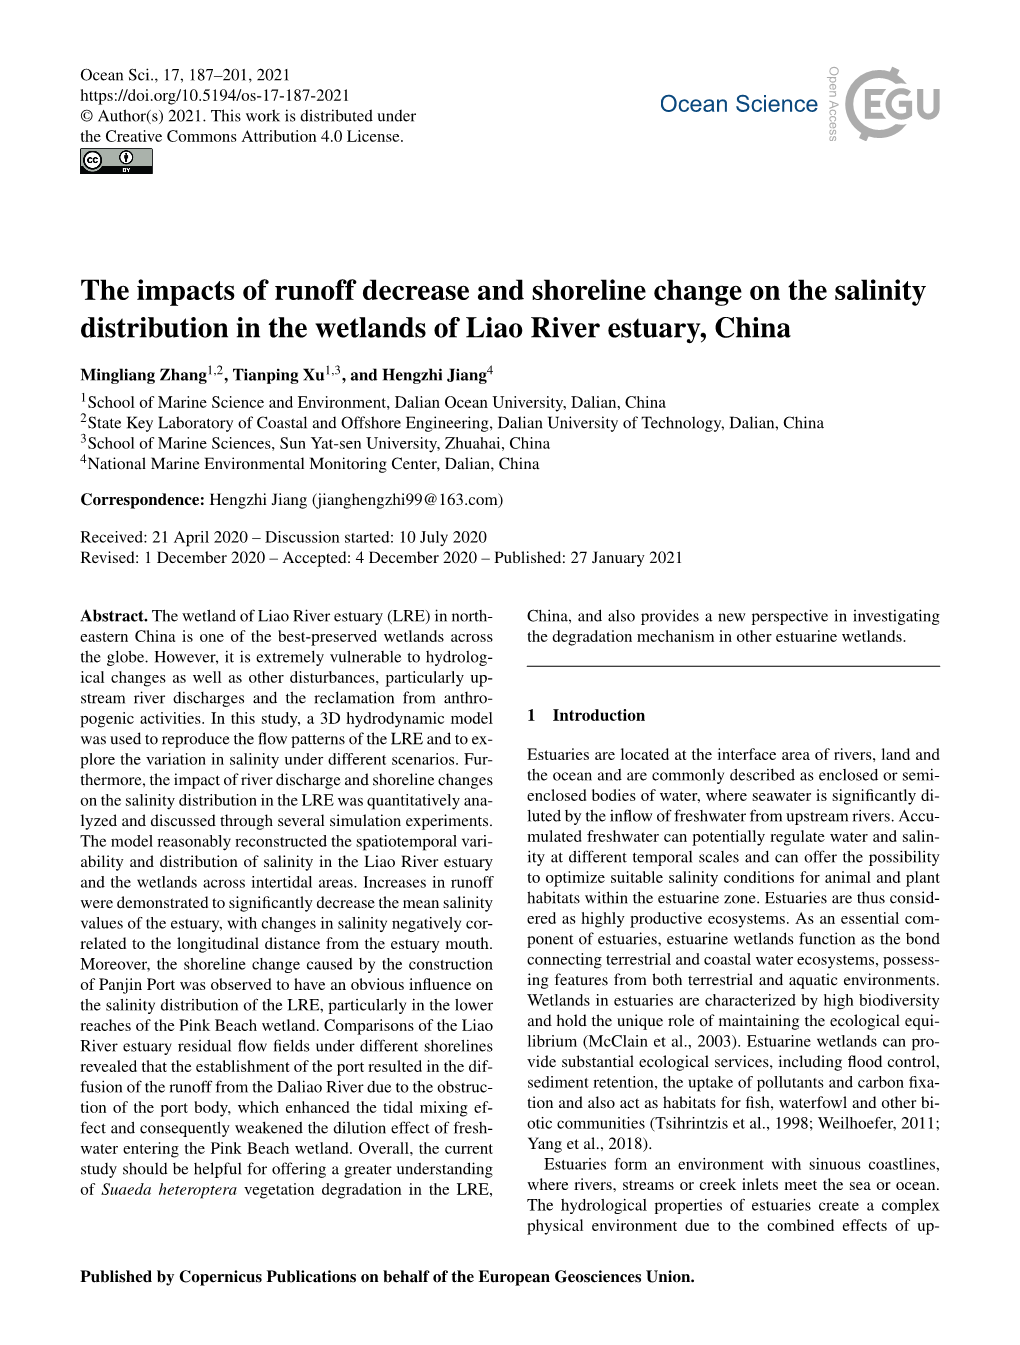 The Impacts of Runoff Decrease and Shoreline Change on the Salinity Distribution in the Wetlands of Liao River Estuary, China